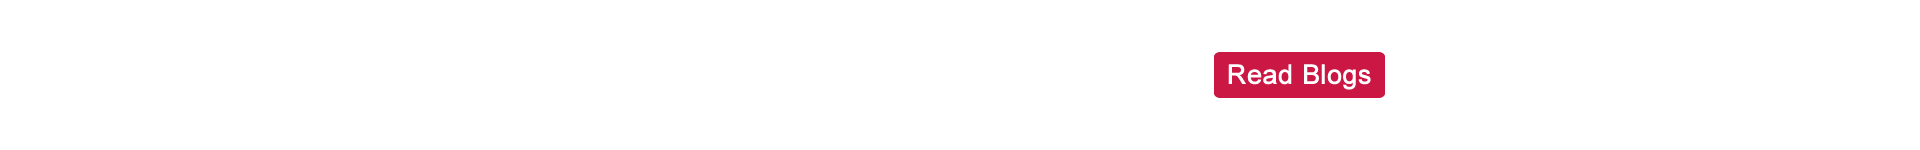 Physician’s Point of View -Texas MedClinic